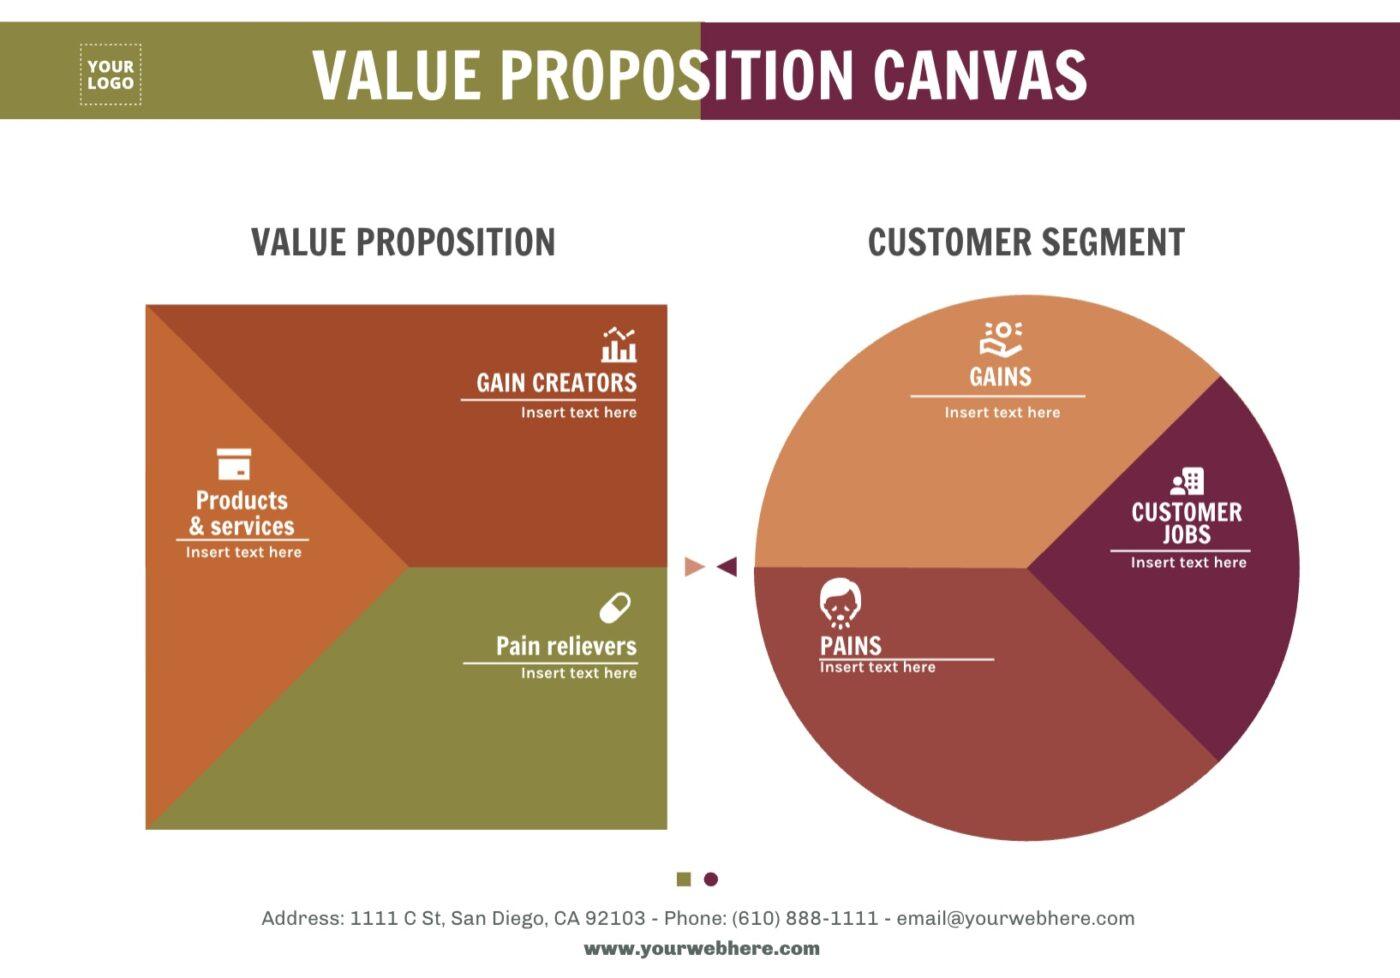 Value Proposition Canvas Template by Edit.org